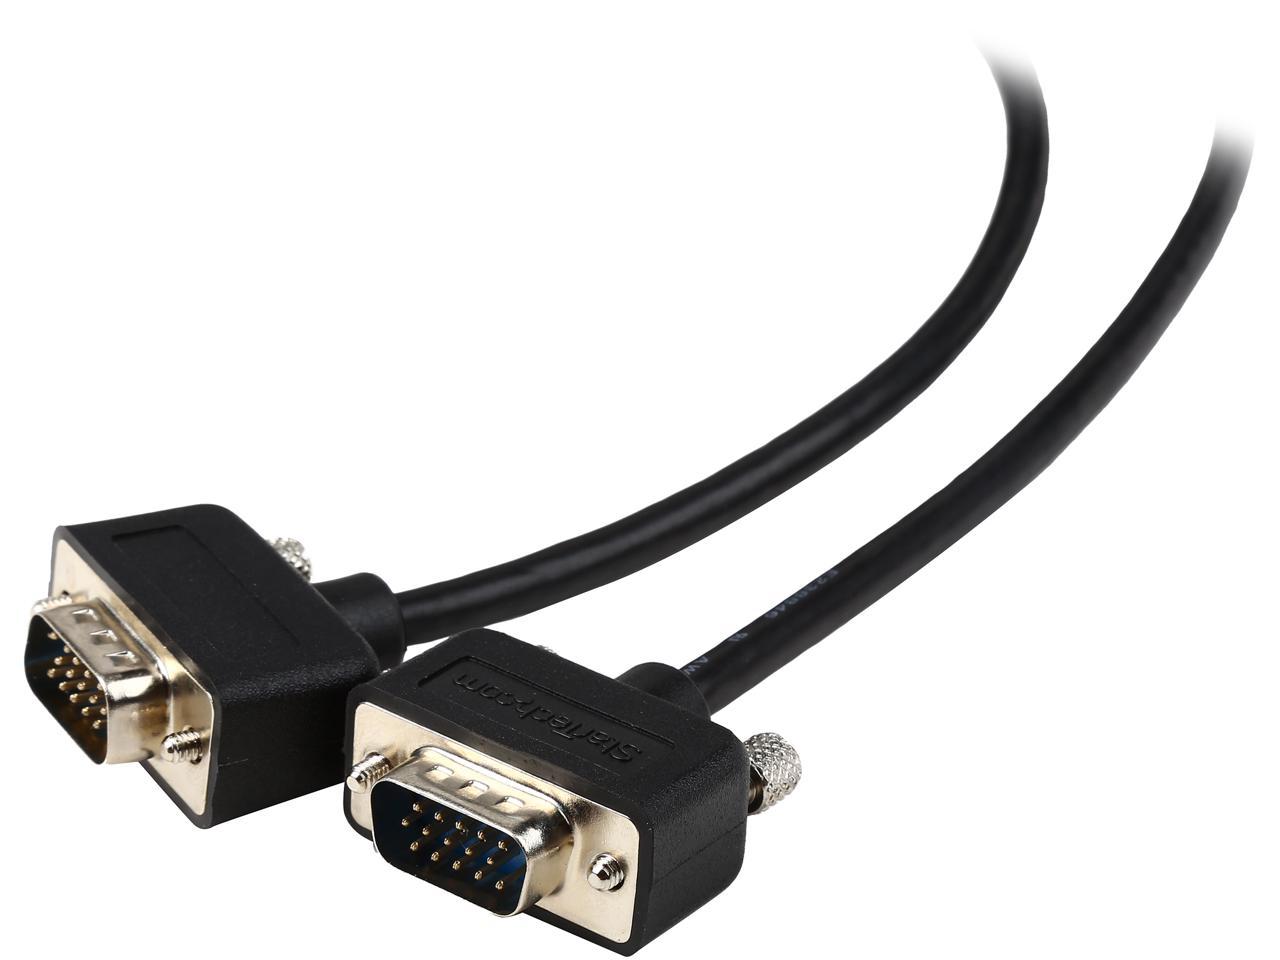 StarTech.com MXT101MMLP15 15 ft. Thin Coax High Res VGA Monitor Cable -Low Profile HD15 M/M